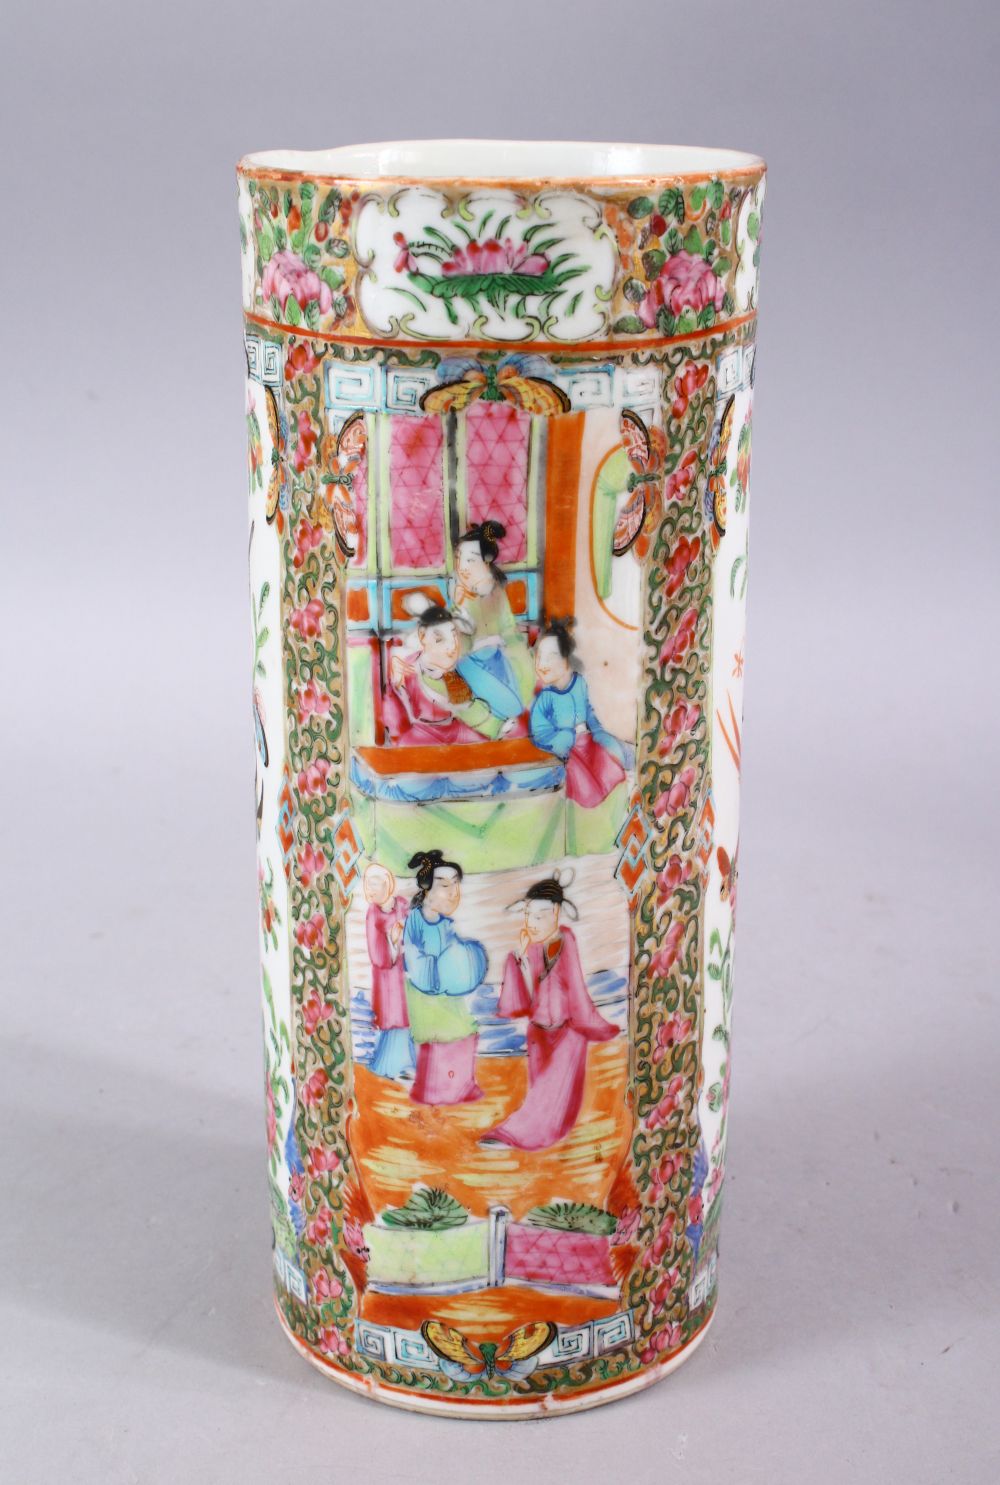 A 19TH / 20TH CENTURY CHINESE FAMILLE ROSE PORCELAIN SLEEVE VASE, decorated in typical canton